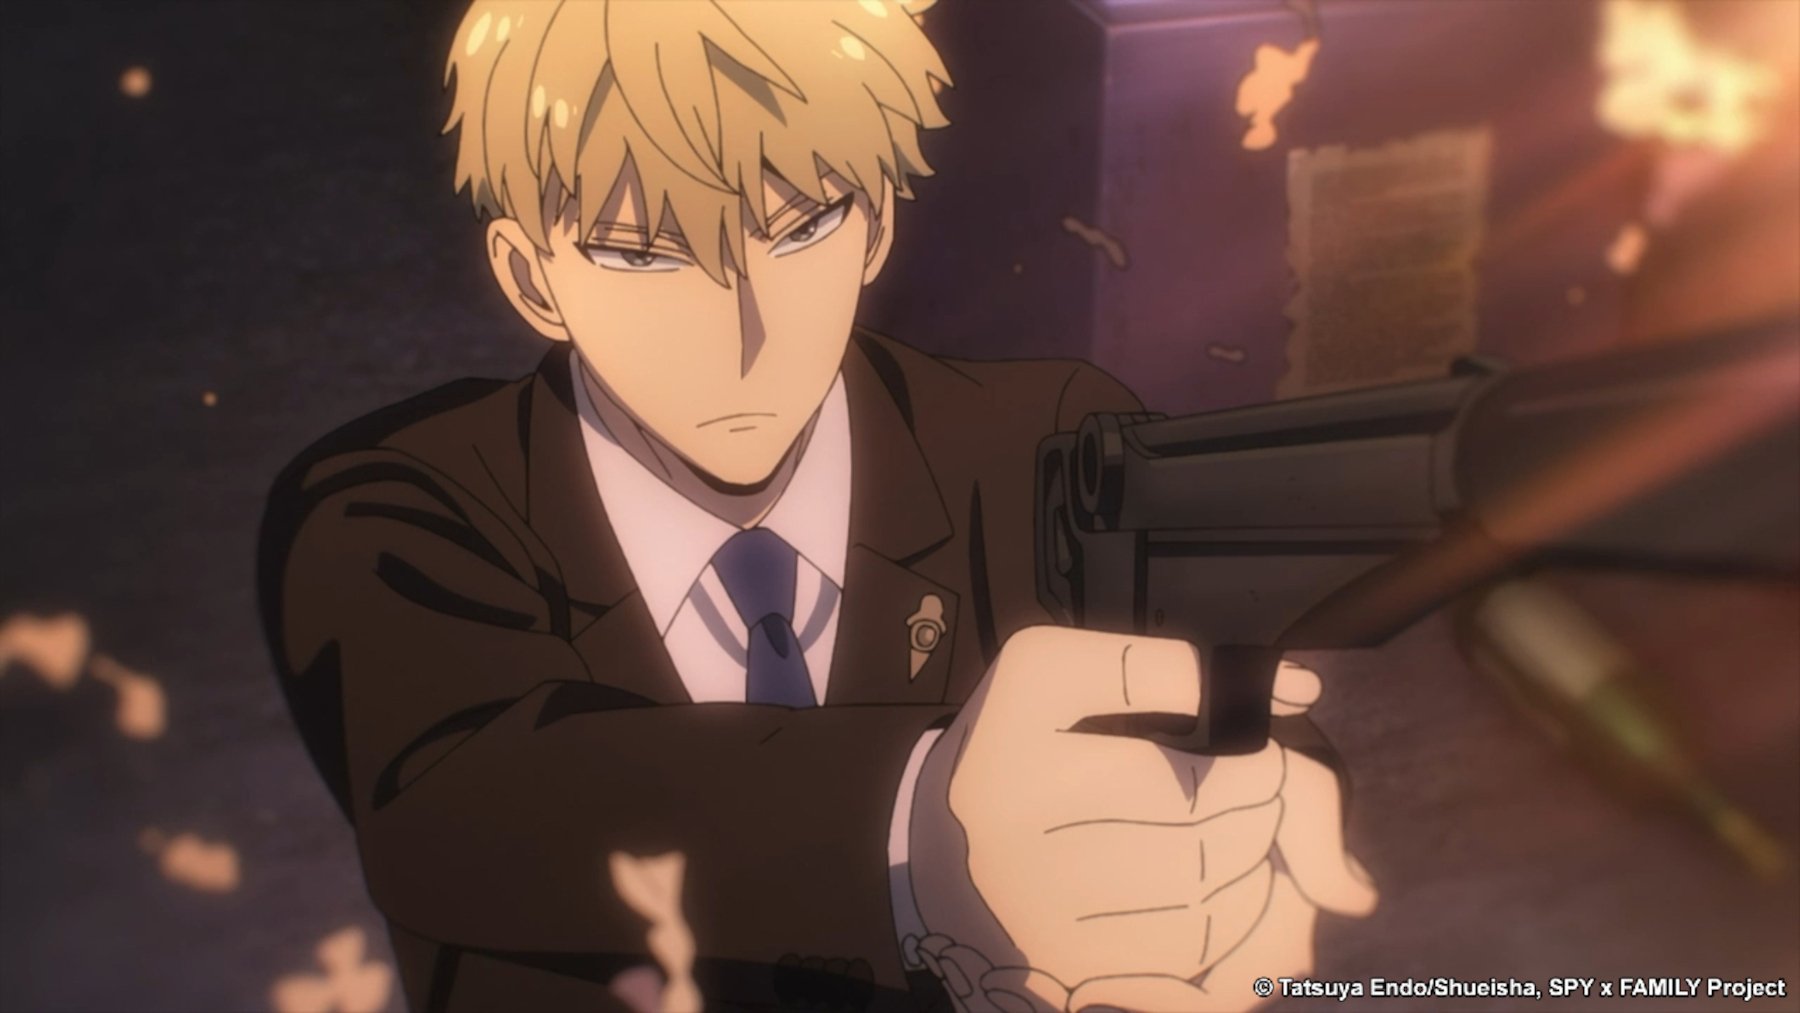 Twilight in 'Spy x Family' Part 2 for our article about what time it comes out on Crunchyroll. He's wearing a suit, holding a gun, and looks angry.